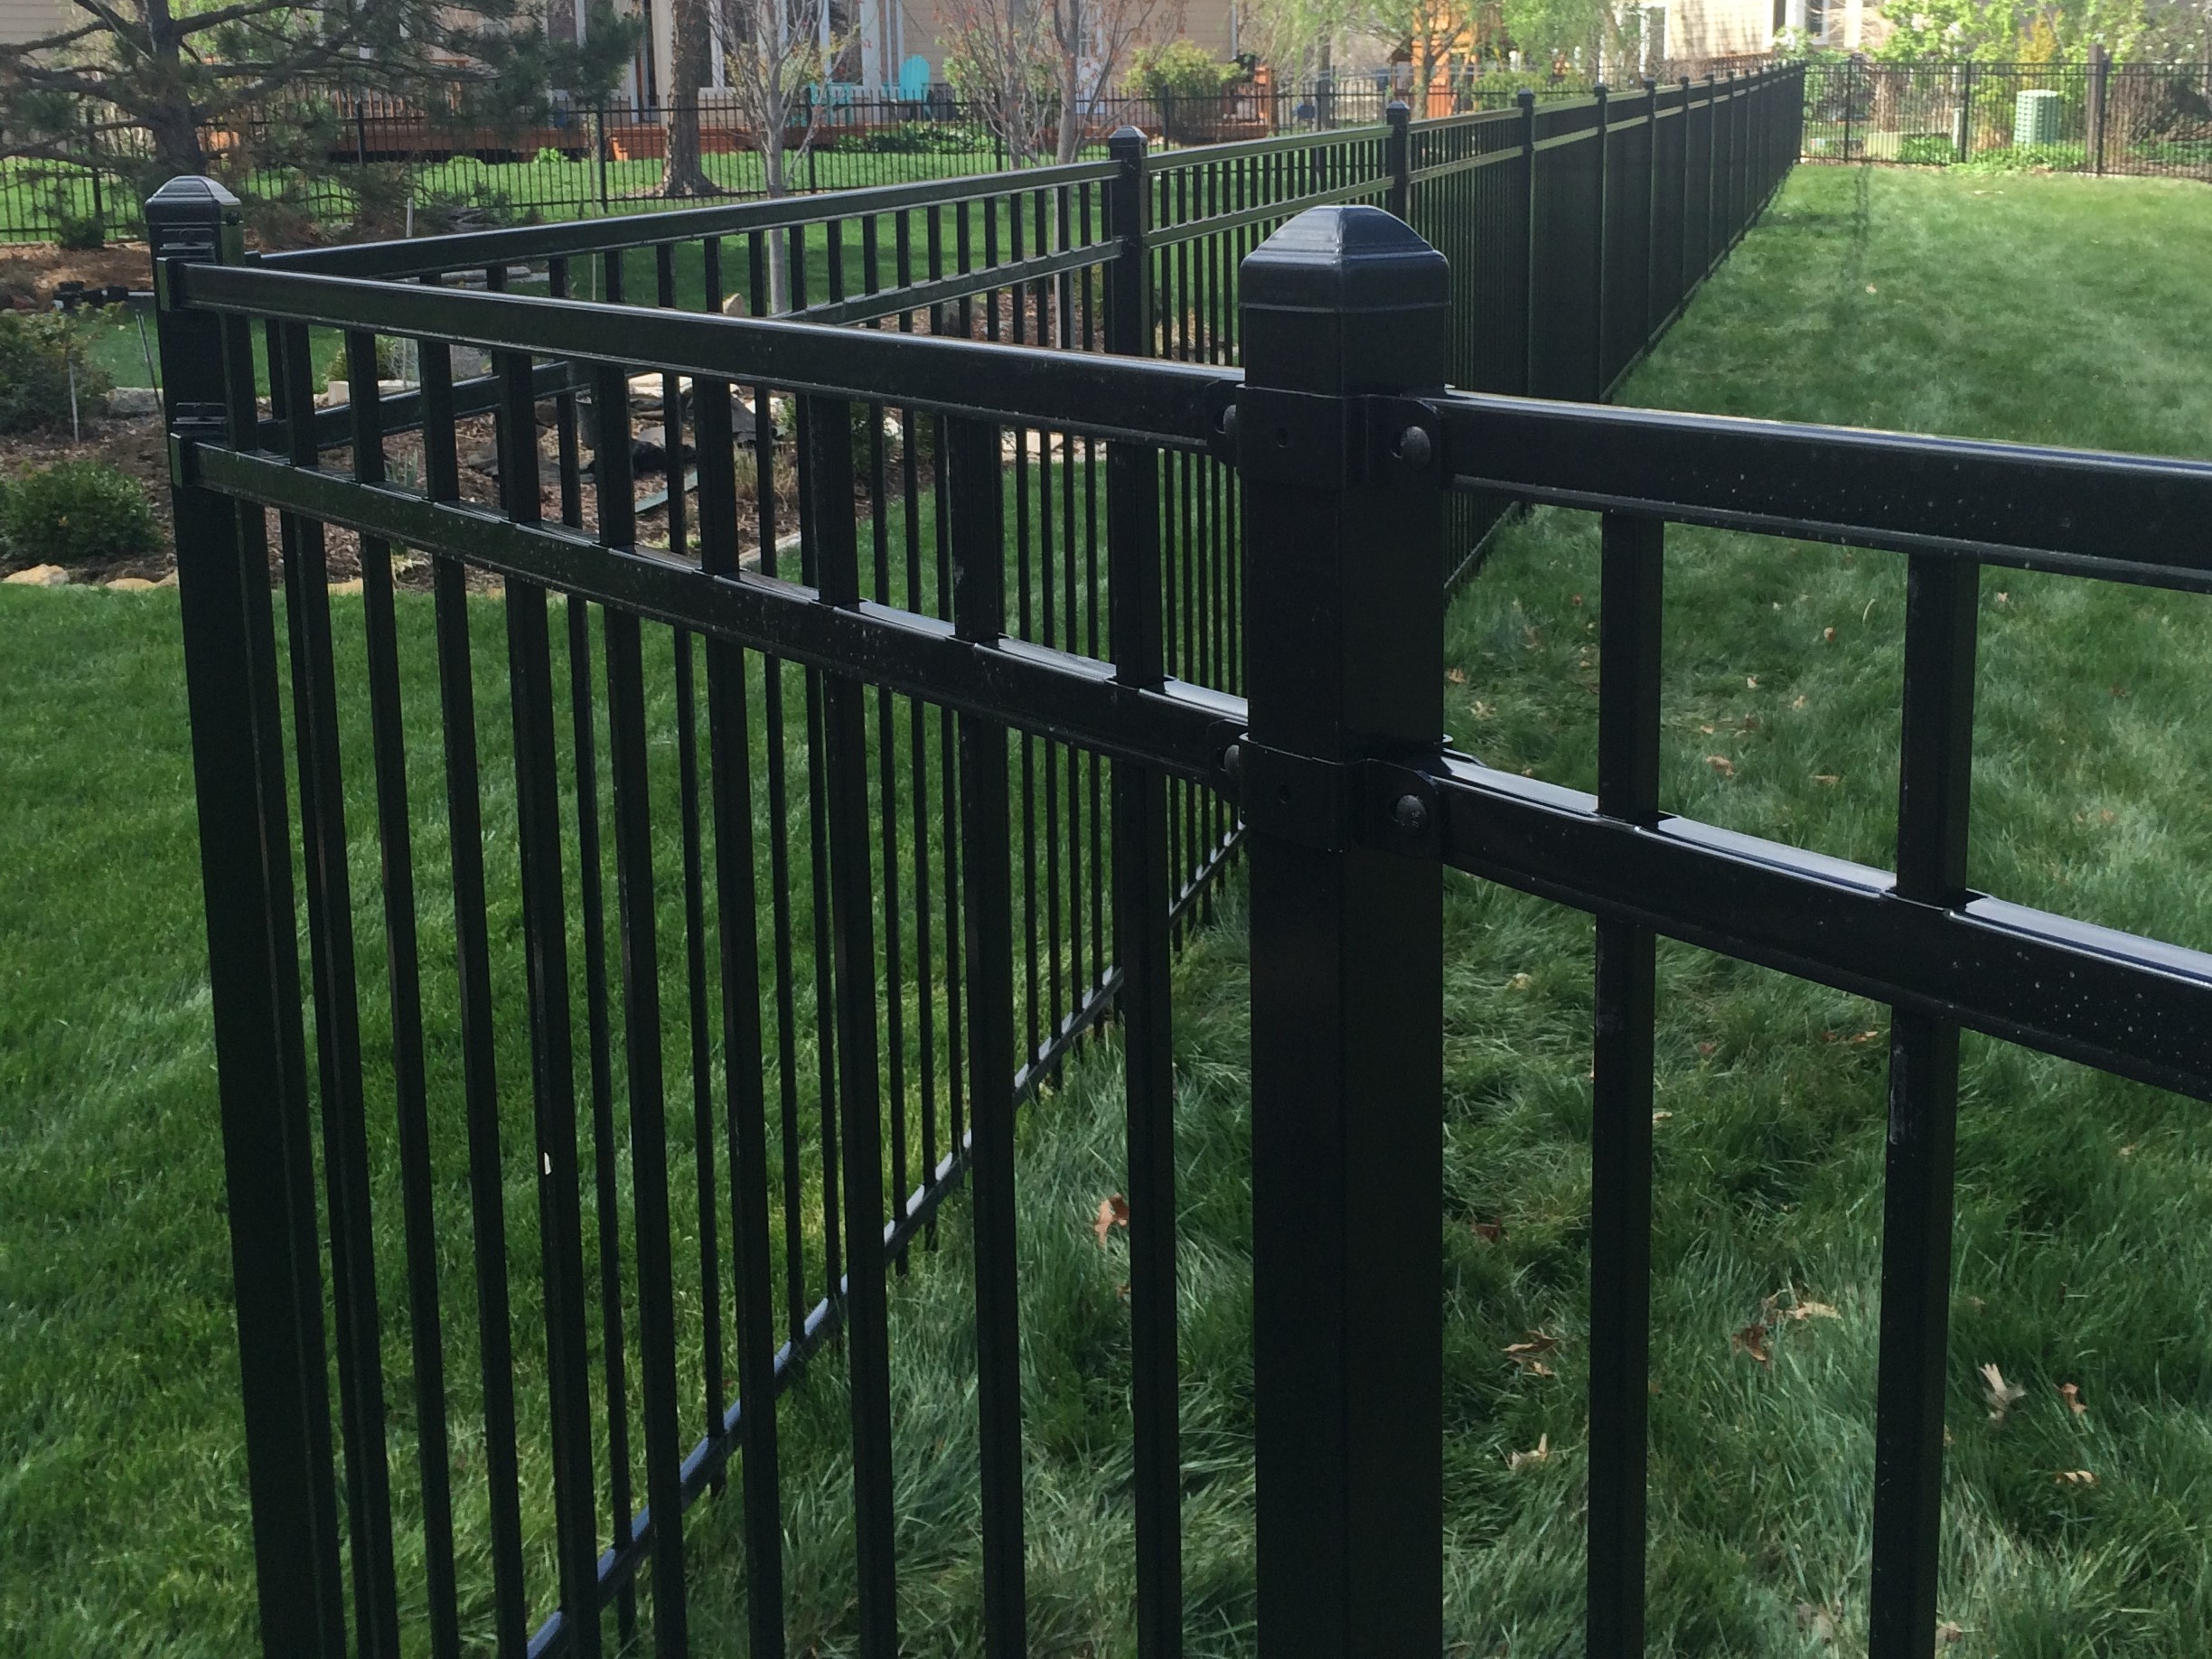 steel fence showing how straight it is for at least 40 feet along a backyard